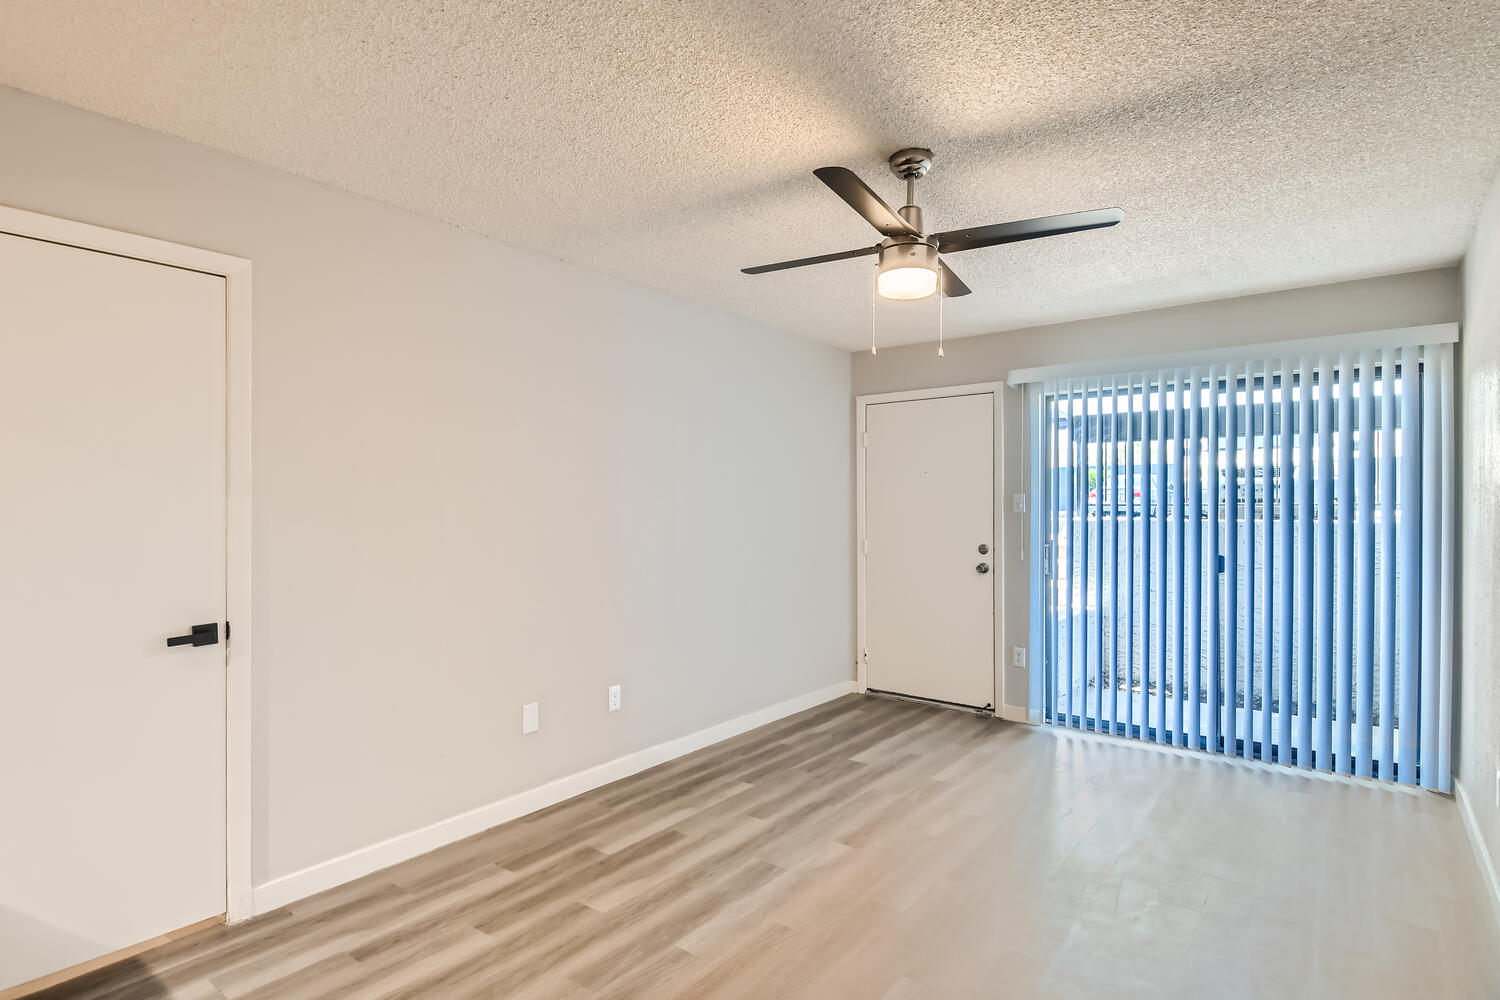 An open concept living area with a sliding door to the patio at Rise on McClintock.